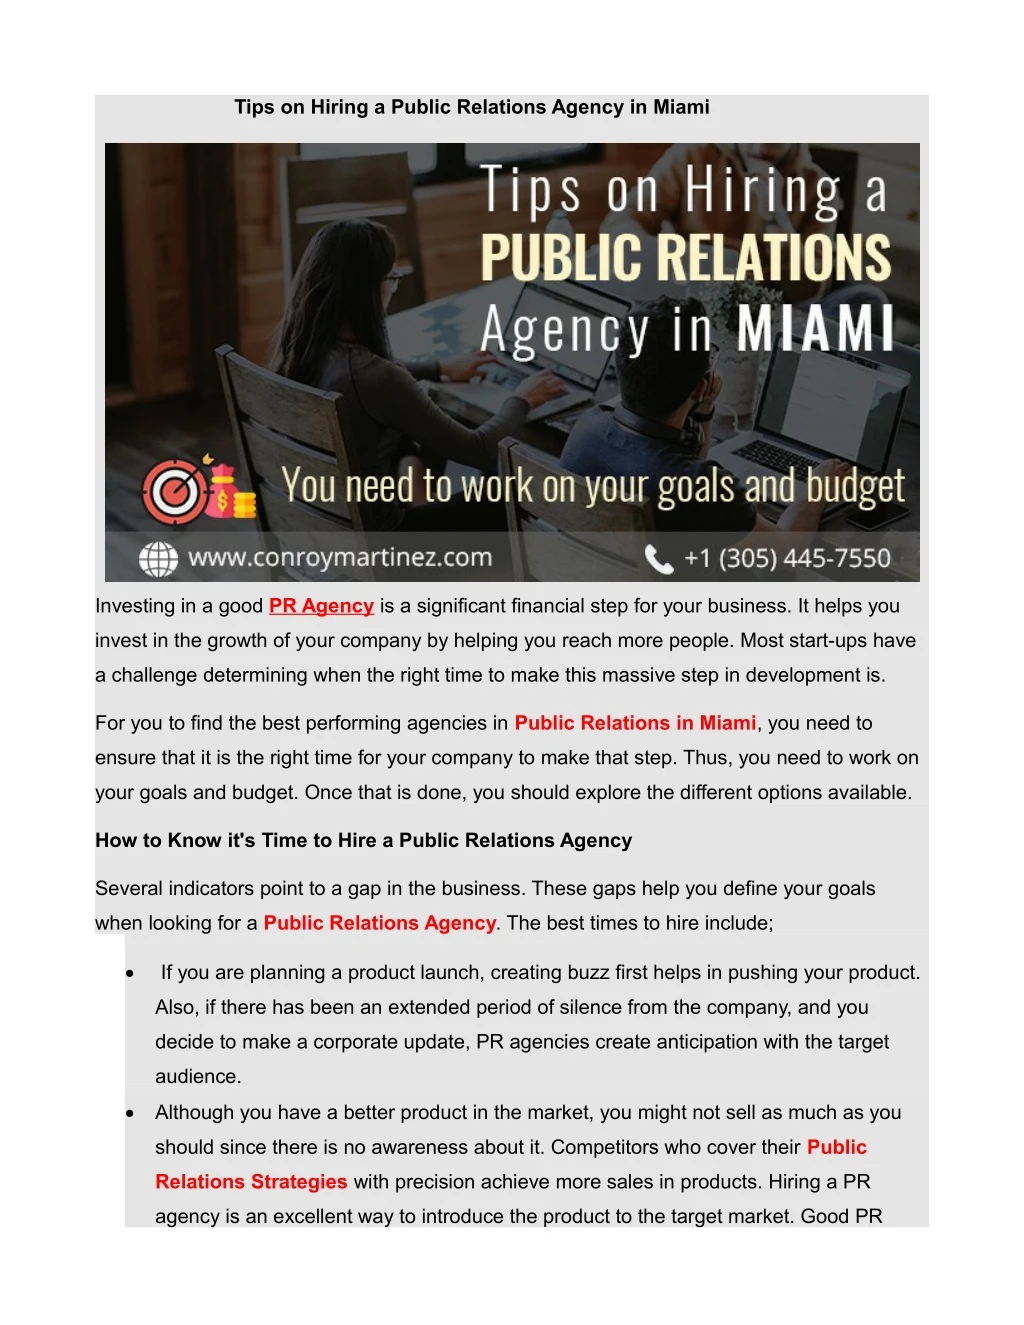 tips on hiring a public relations agency in miami